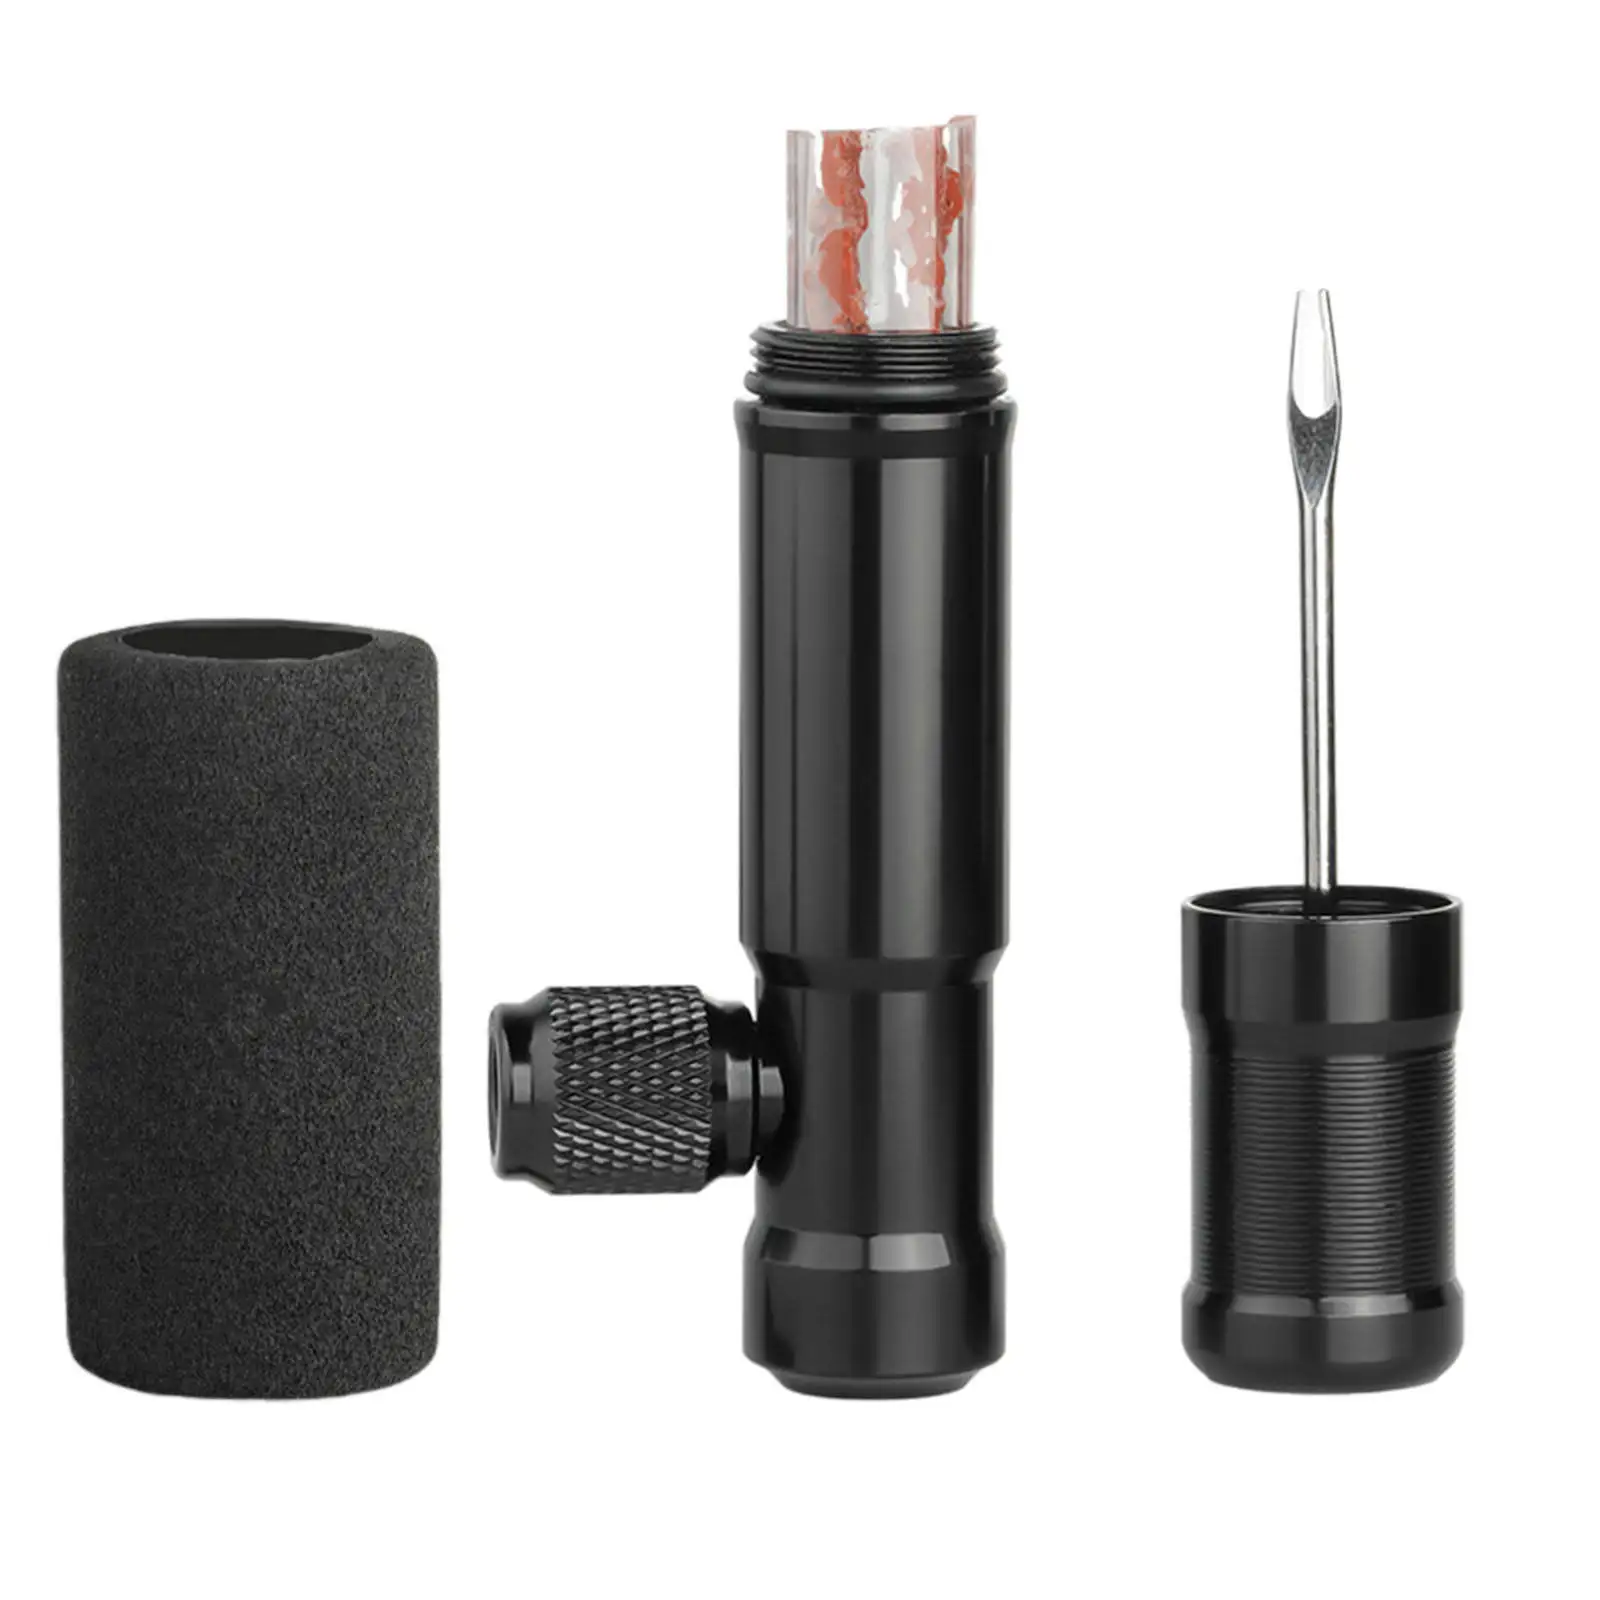 Tubeless Tire Repair Bike Tire Puncture Kit - Portable - Complete Kit - Tire Plugs - Easy and Effortless Usage